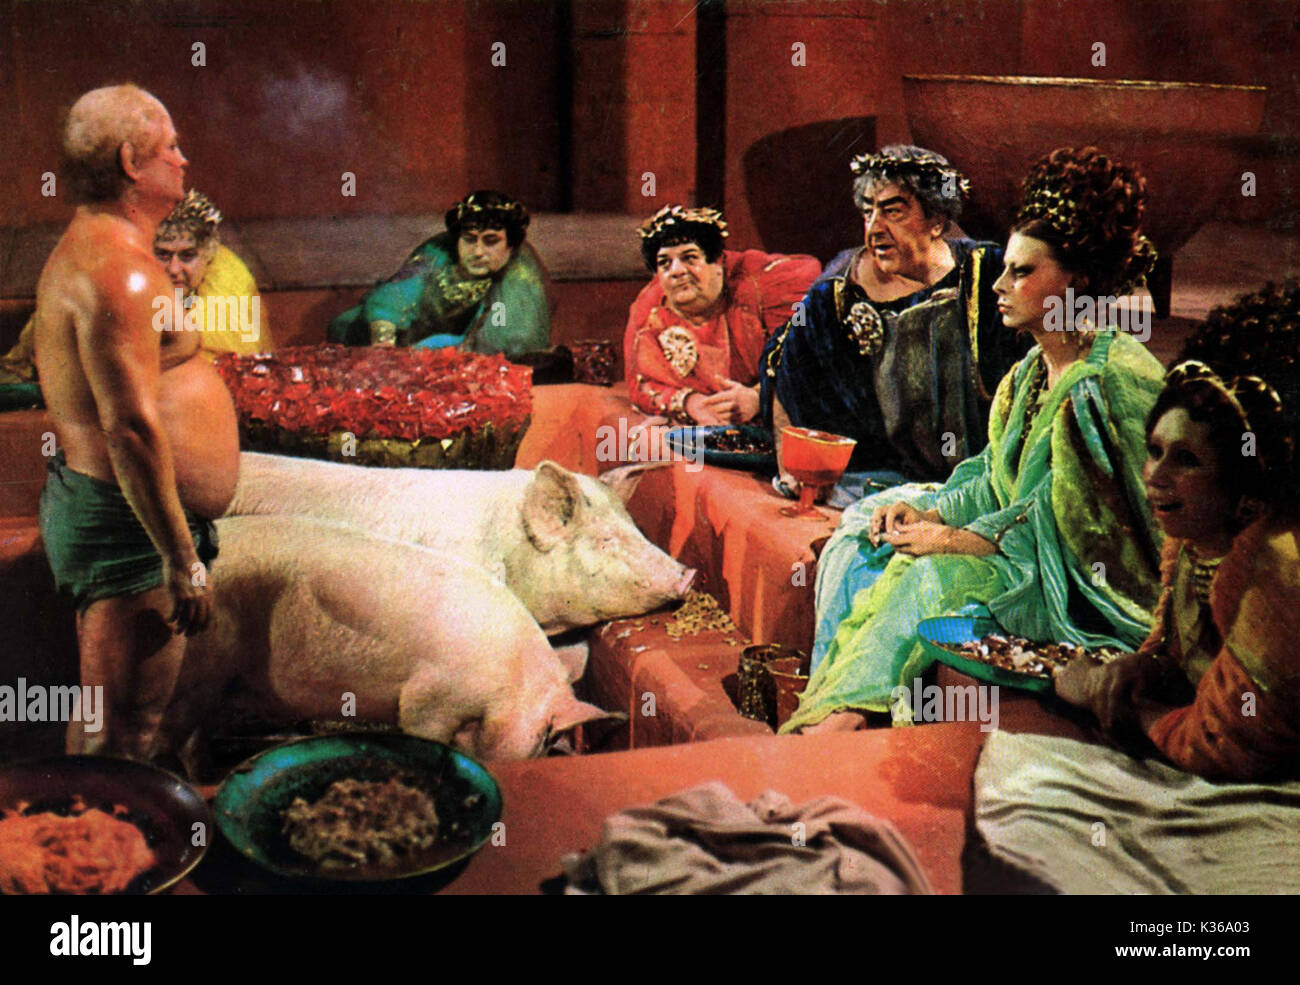 FELLINI SATYRICON Date : 1969 Banque D'Images